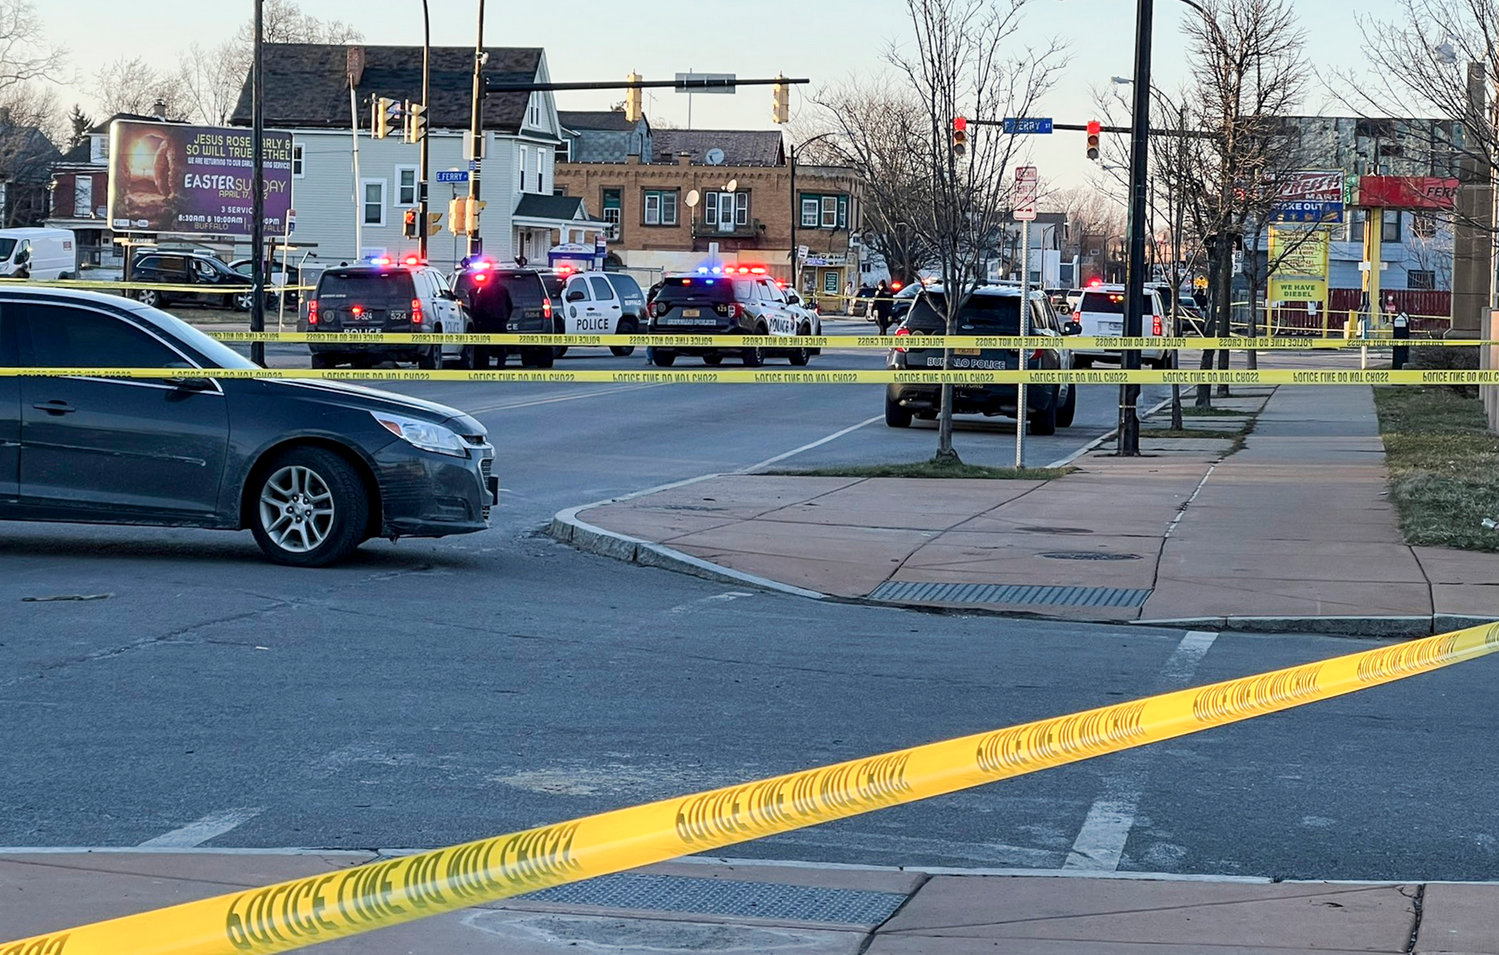 SCENE OF SHOOTING — Police vehicles and crime scene tape block an area where three police officers were hit by gunfire during a pursuit on Tuesday in Buffalo. The Buffalo Police Department says their injuries don’t appear to be life-threatening.